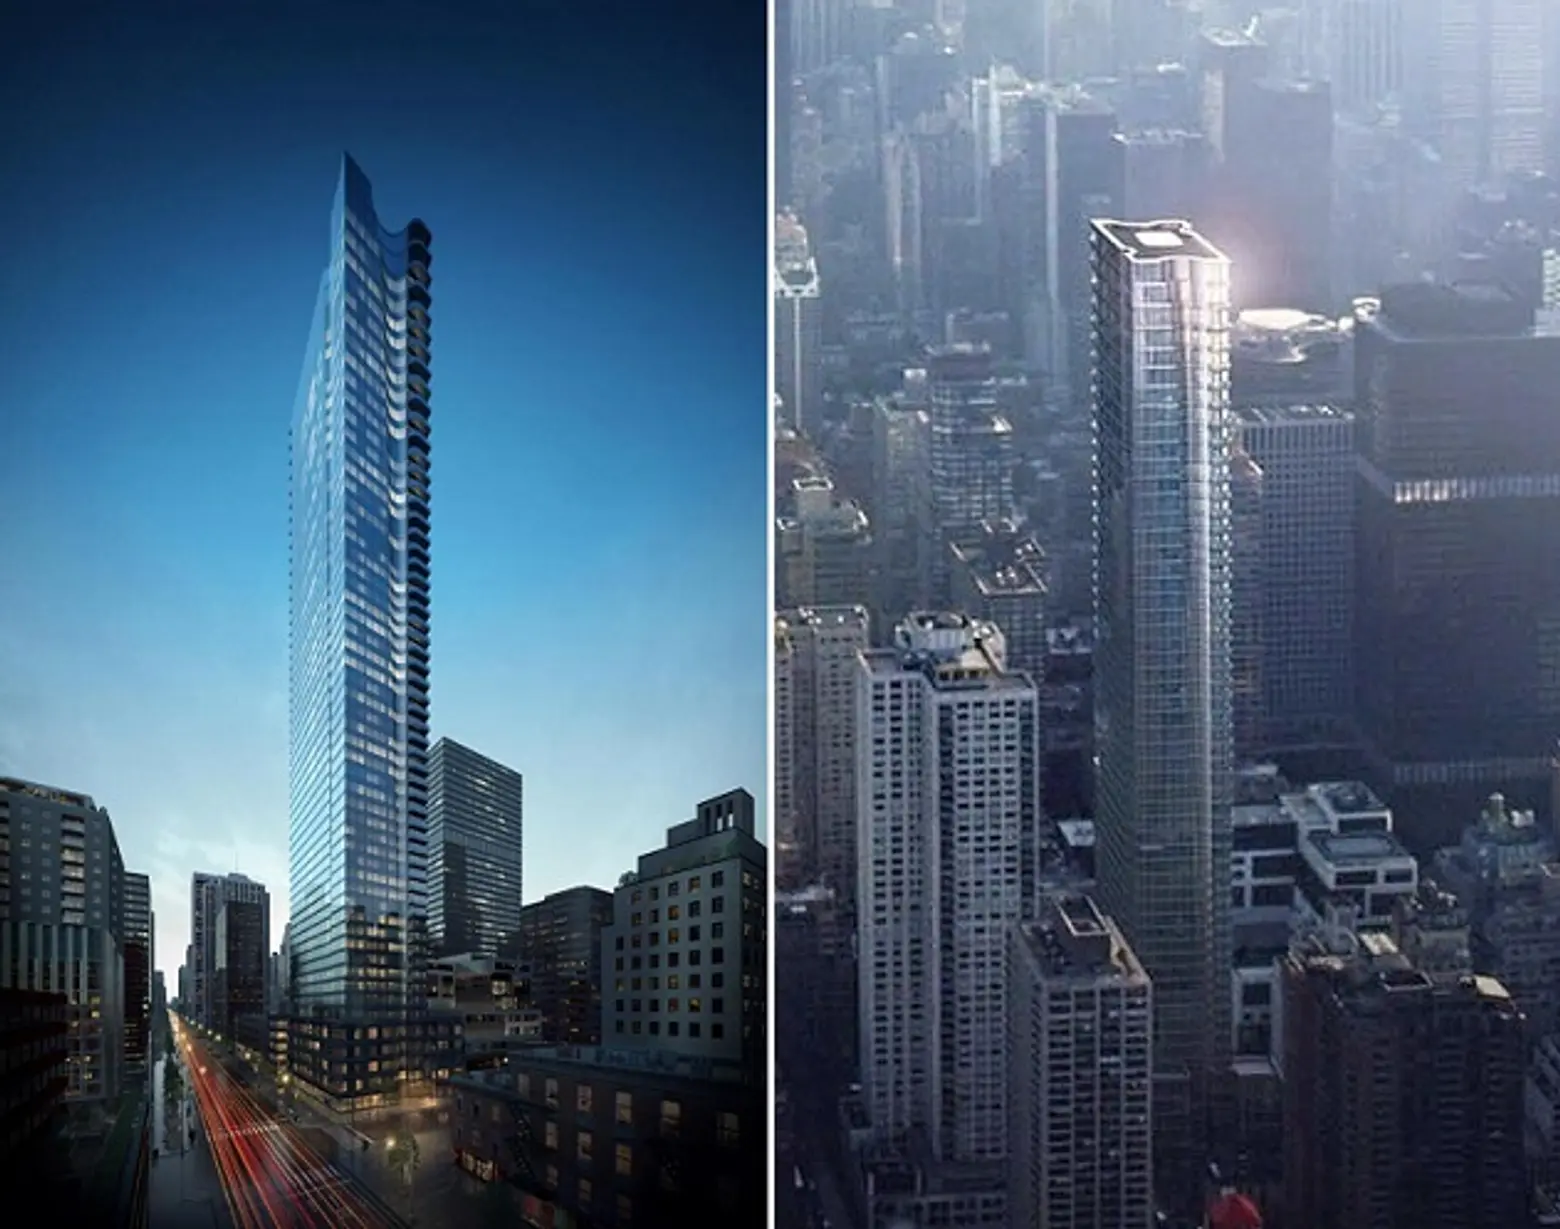 Construction Update: SOM’s 252 East 57th Street Getting Its Glass Skin